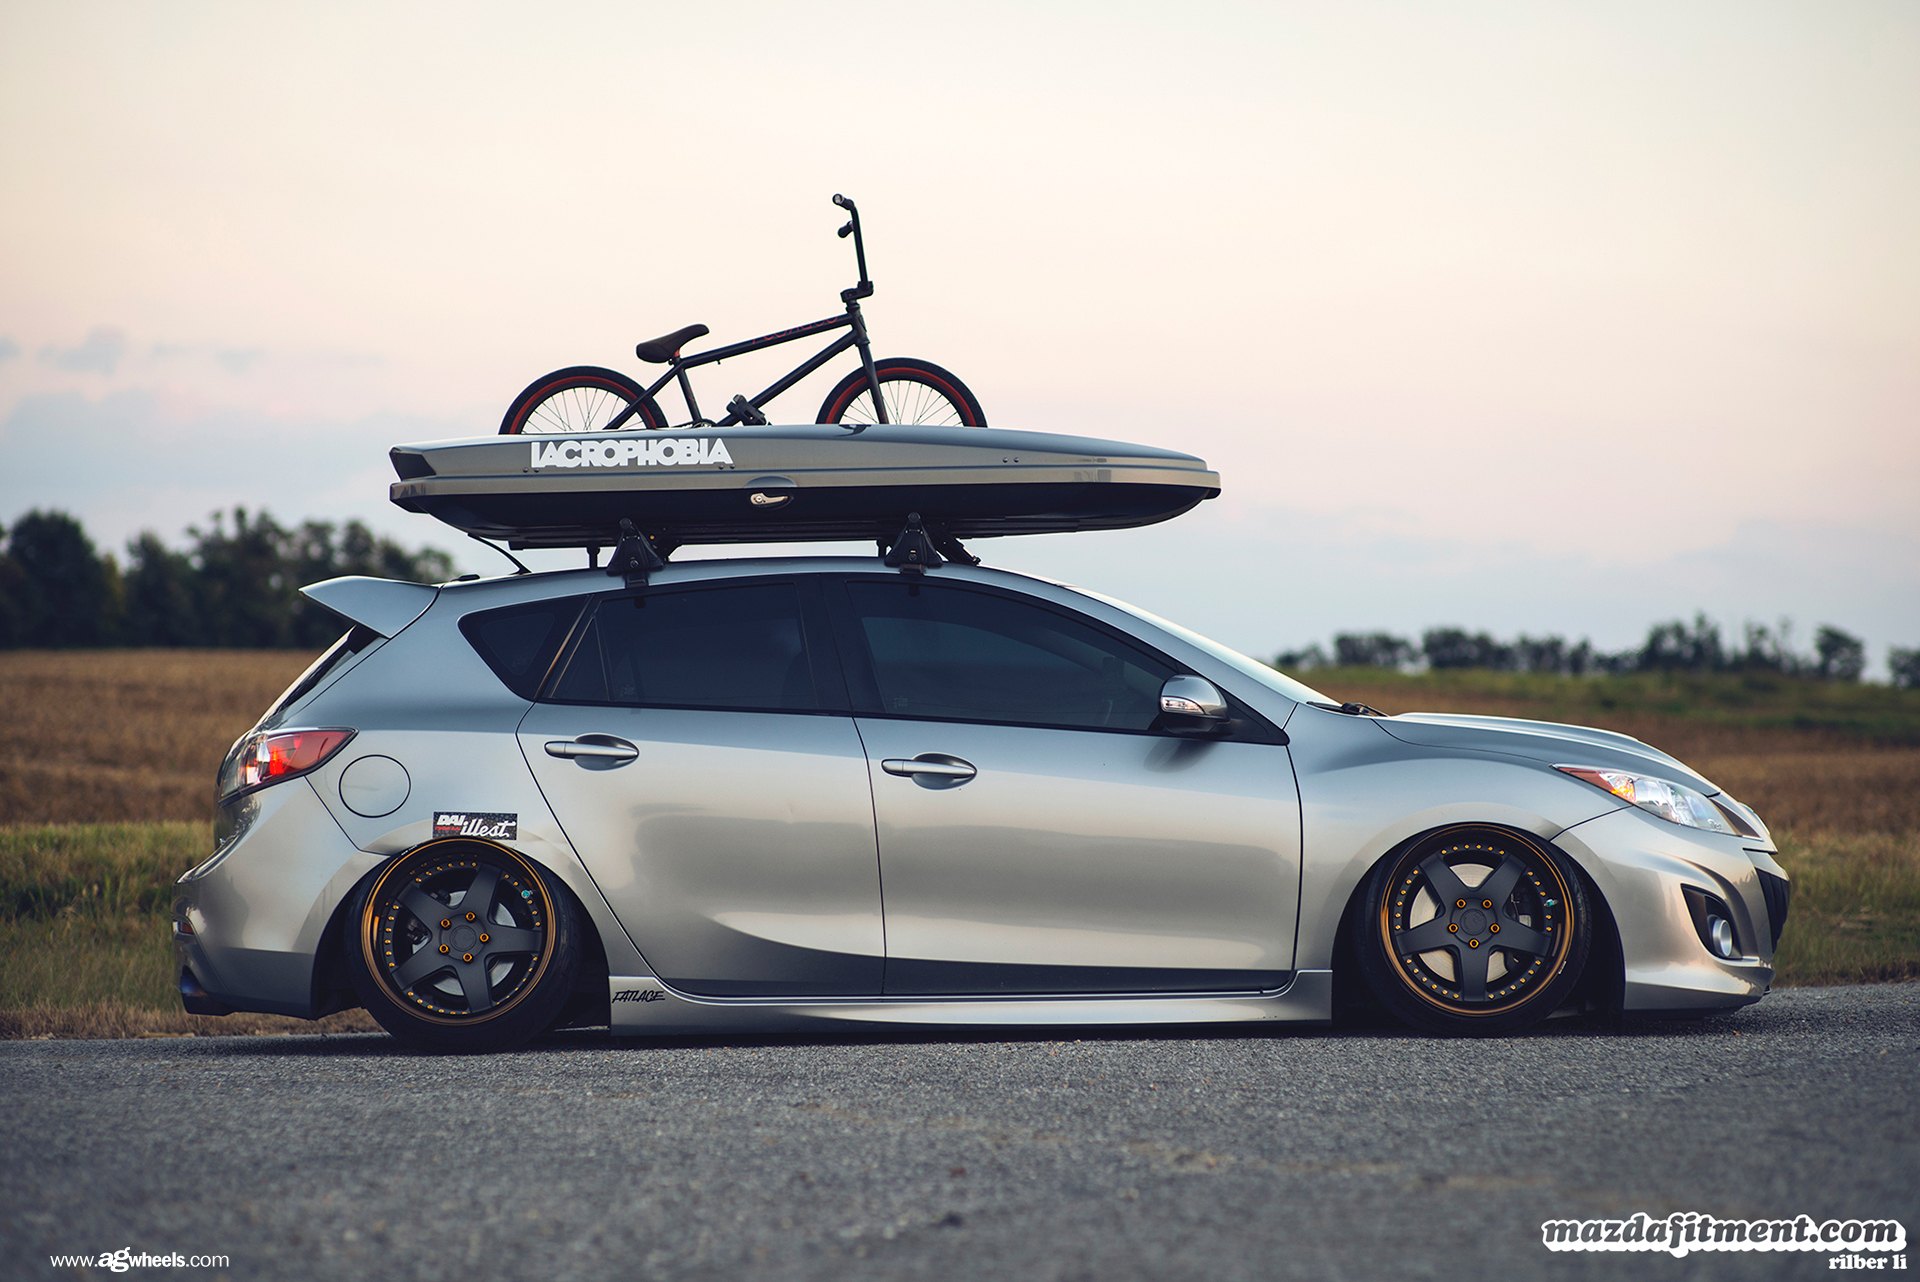 Aftermarket Side Skirs on Gray Lowered Mazda 3 - Photo by Avant Garde Wheels